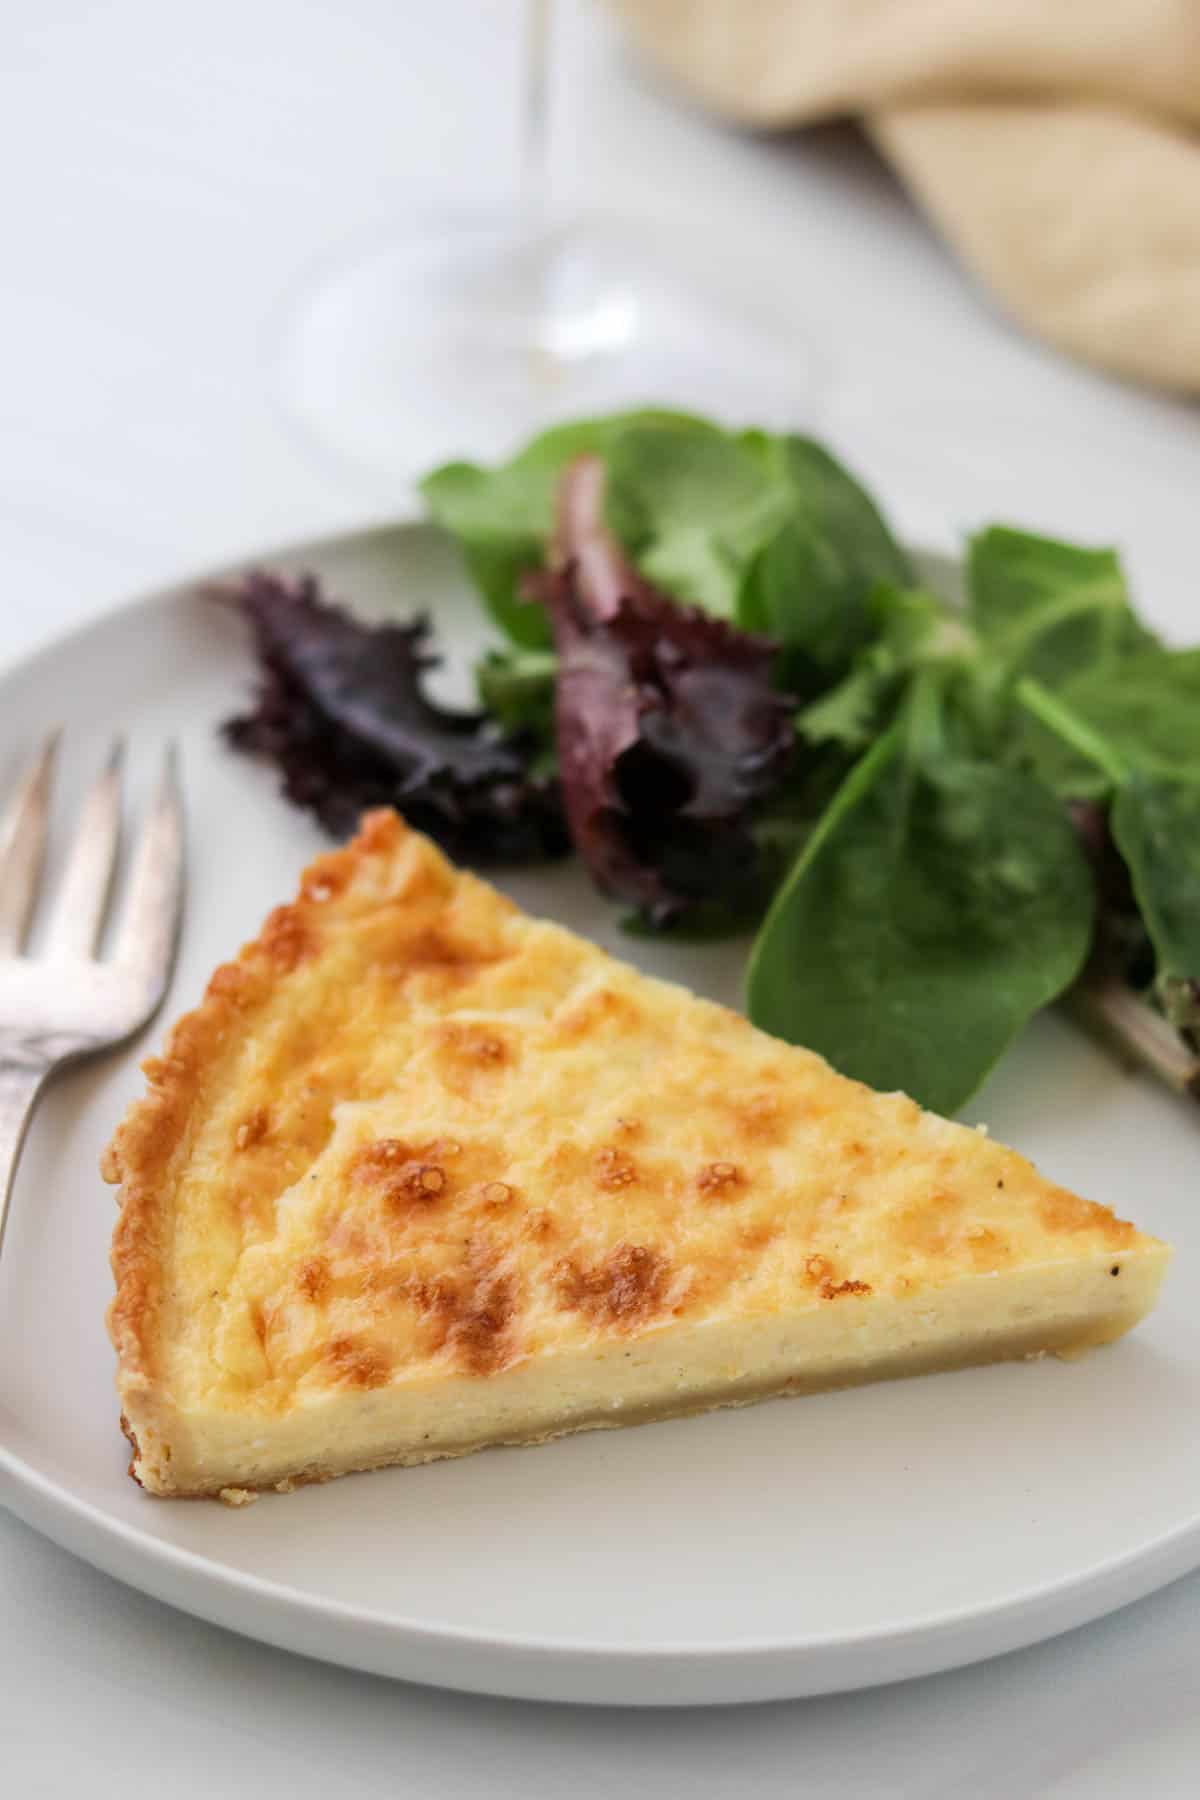 Swedish Cheese Pie (Västerbottenpaj) on a plate with salad and a fork.